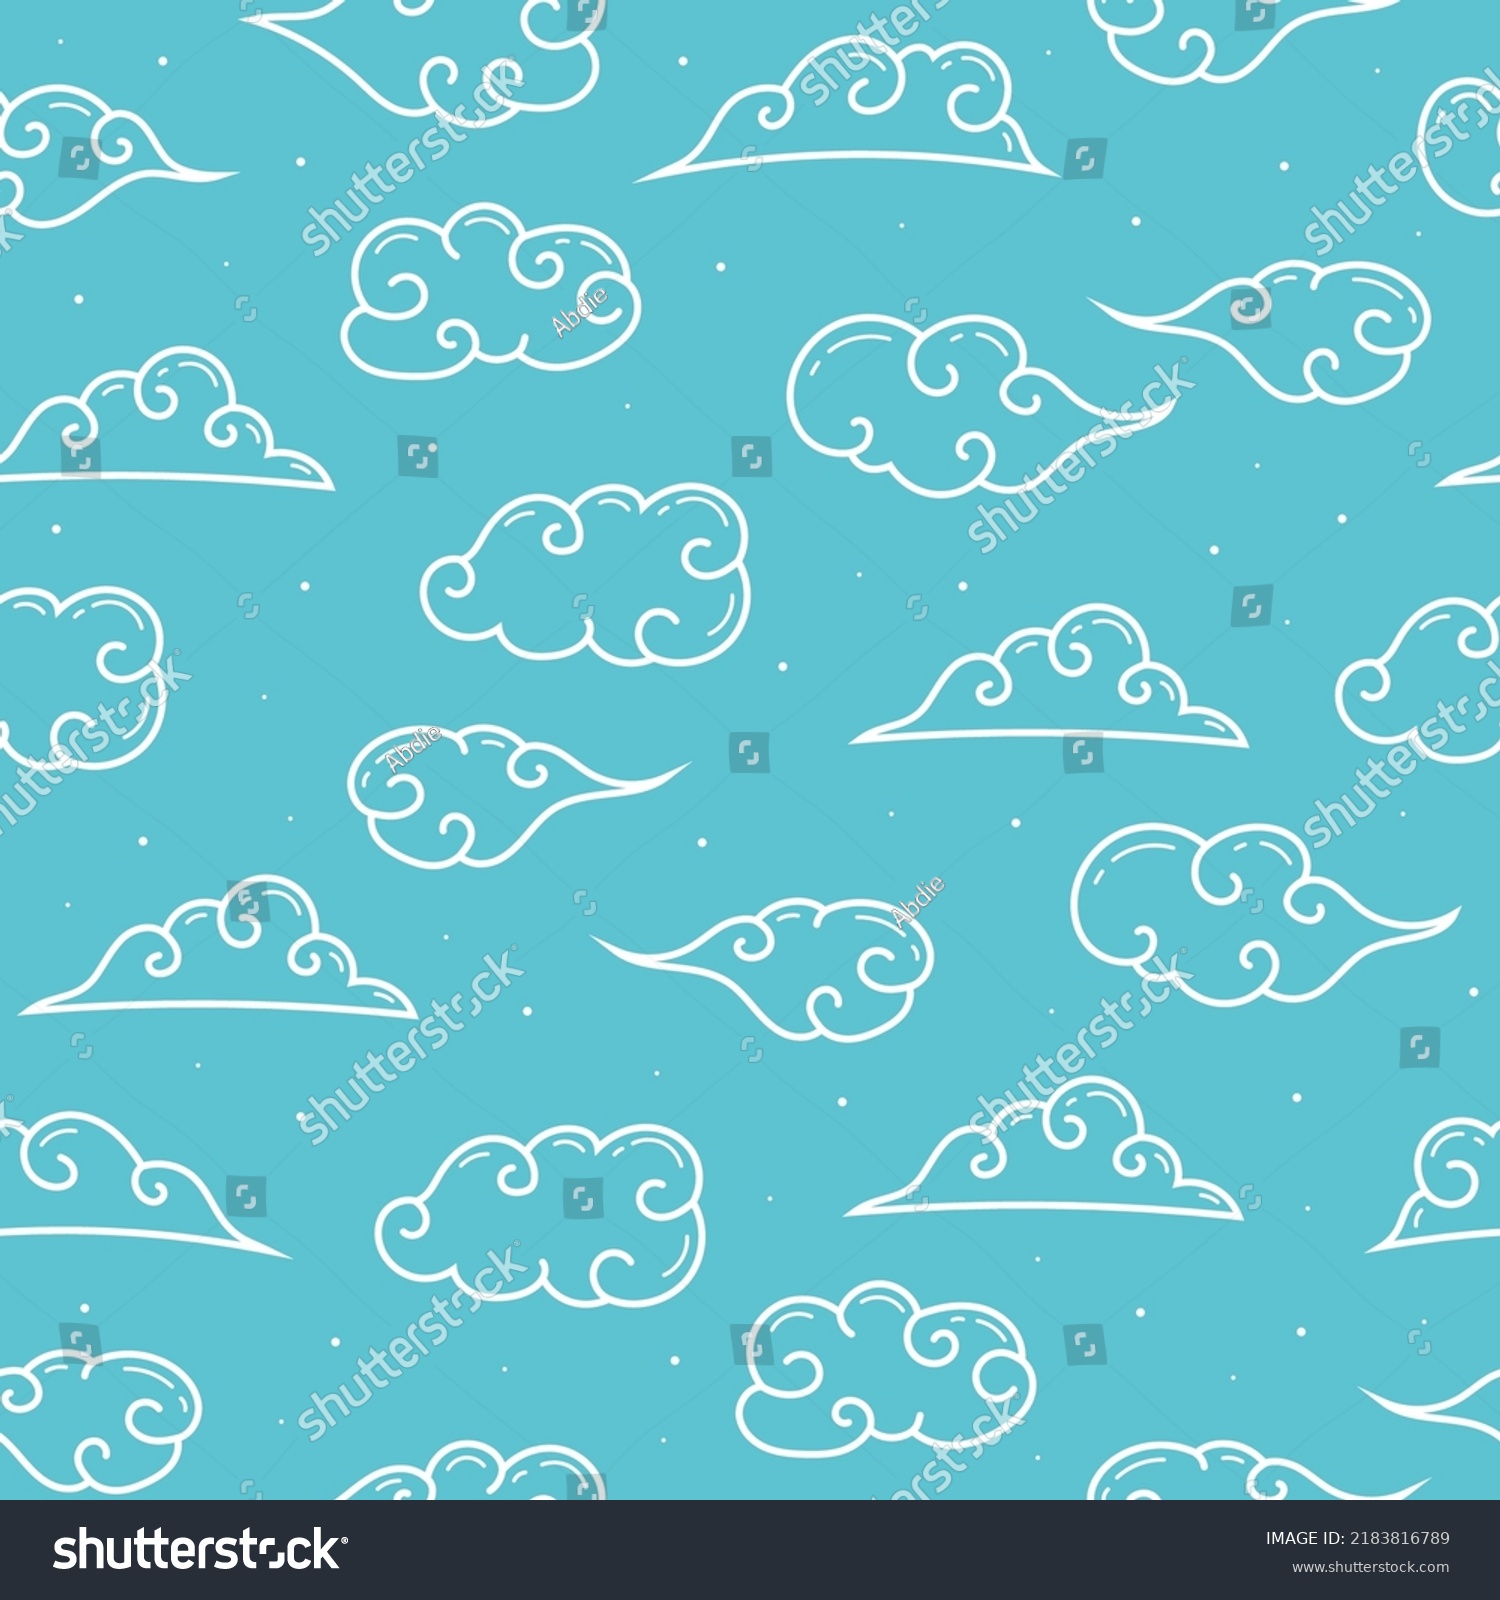 Cute Curly Clouds Outline Seamless Pattern Stock Vector (Royalty Free ...